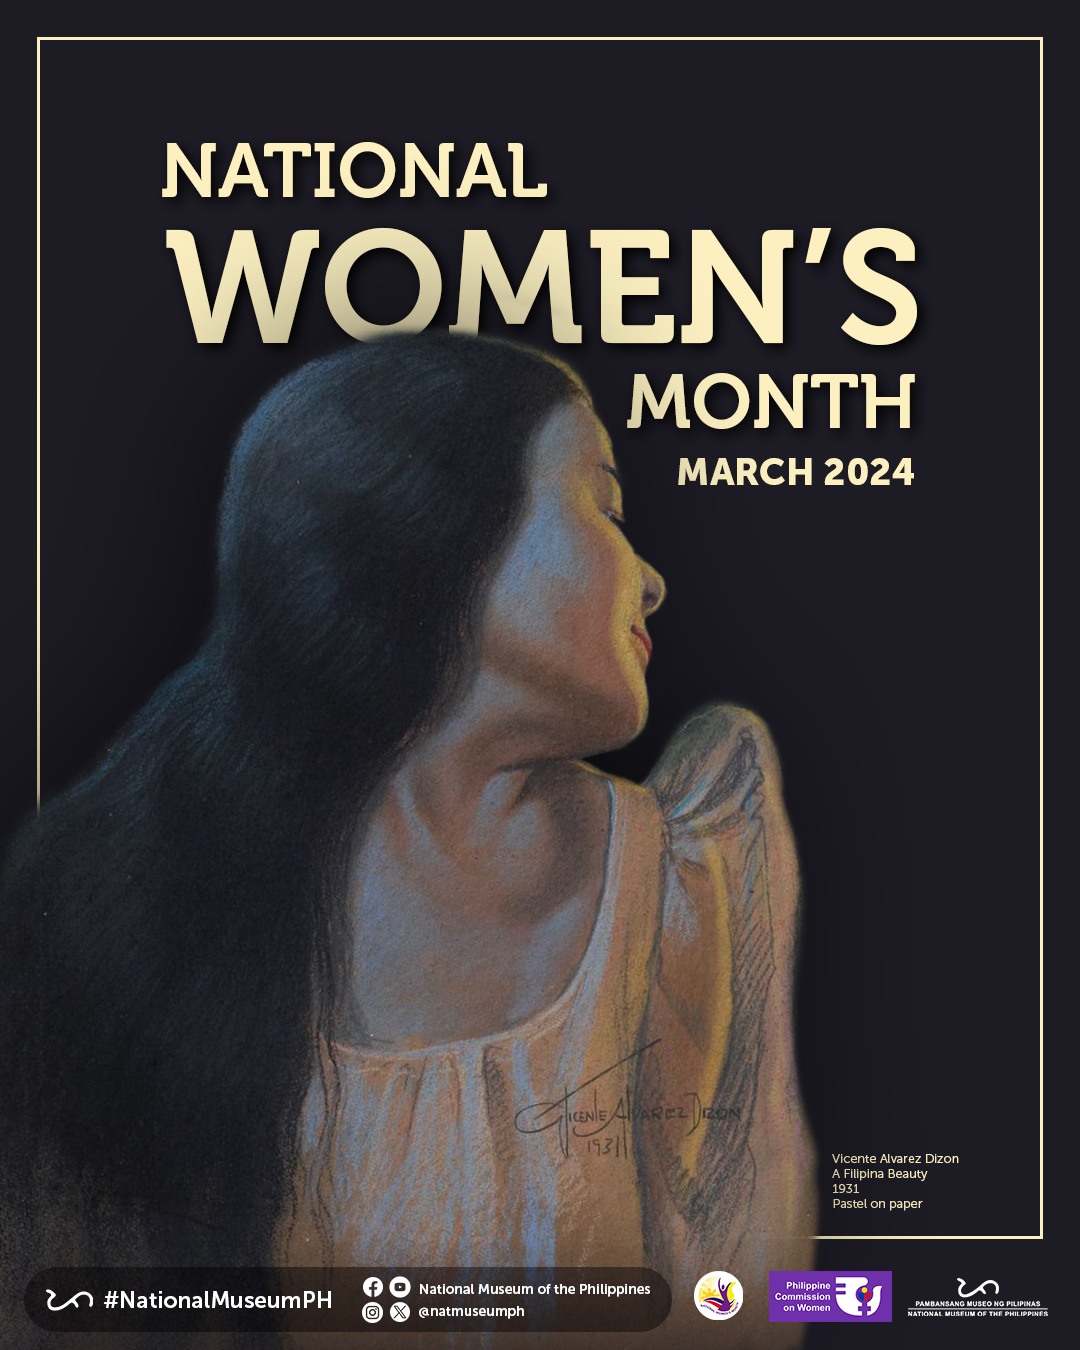 things to do march 2024 - National Women's Month at National Museum